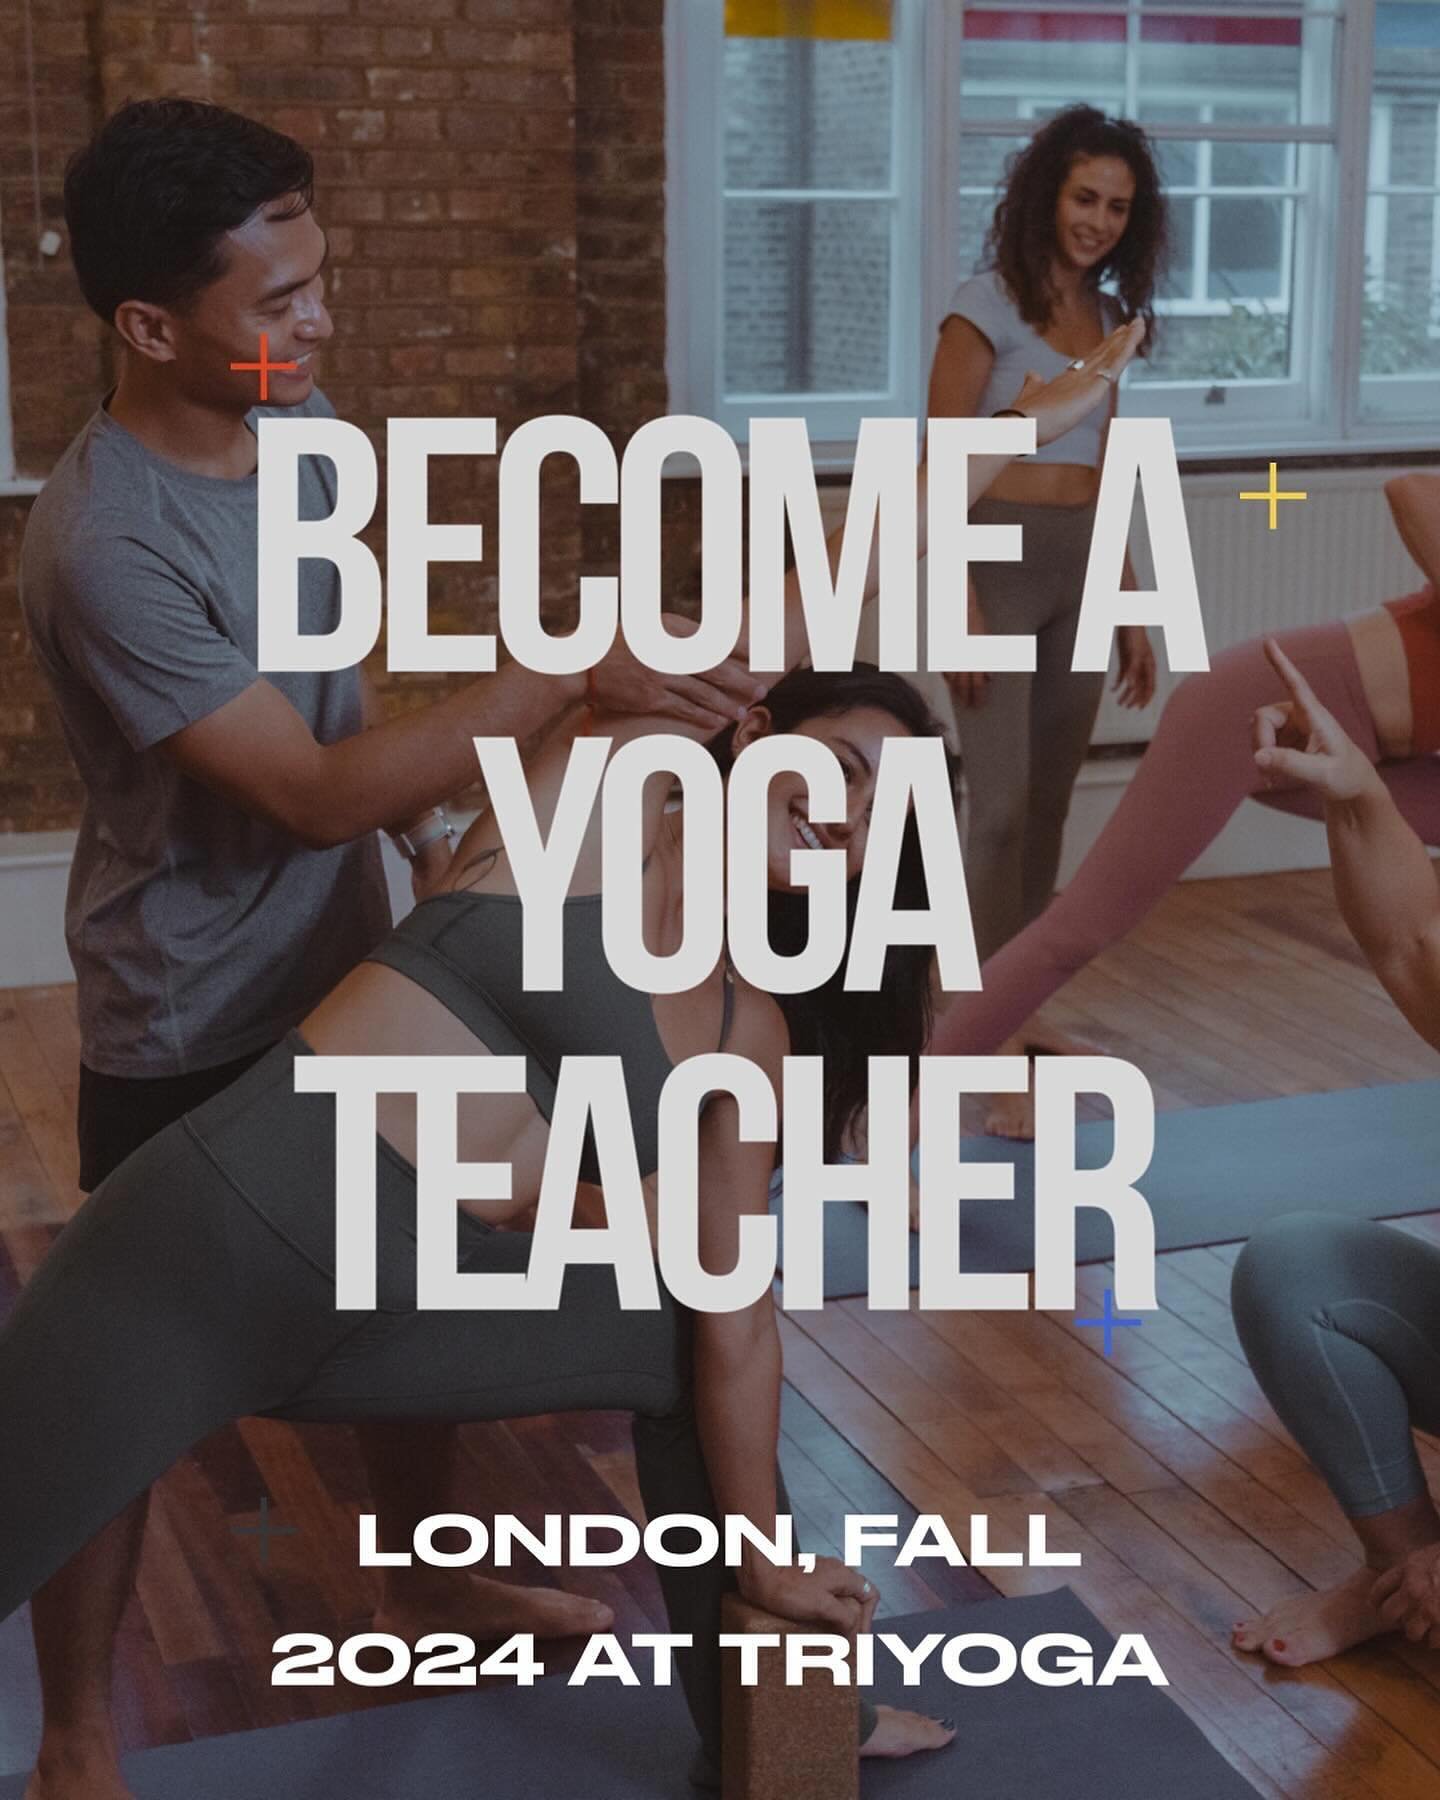 There comes a time for many yoga practitioners where the desire for a deeper exploration into the practice of yoga emerges. For some this may be a calling to share the practice with others, while for others, it may simply be about learning more and d